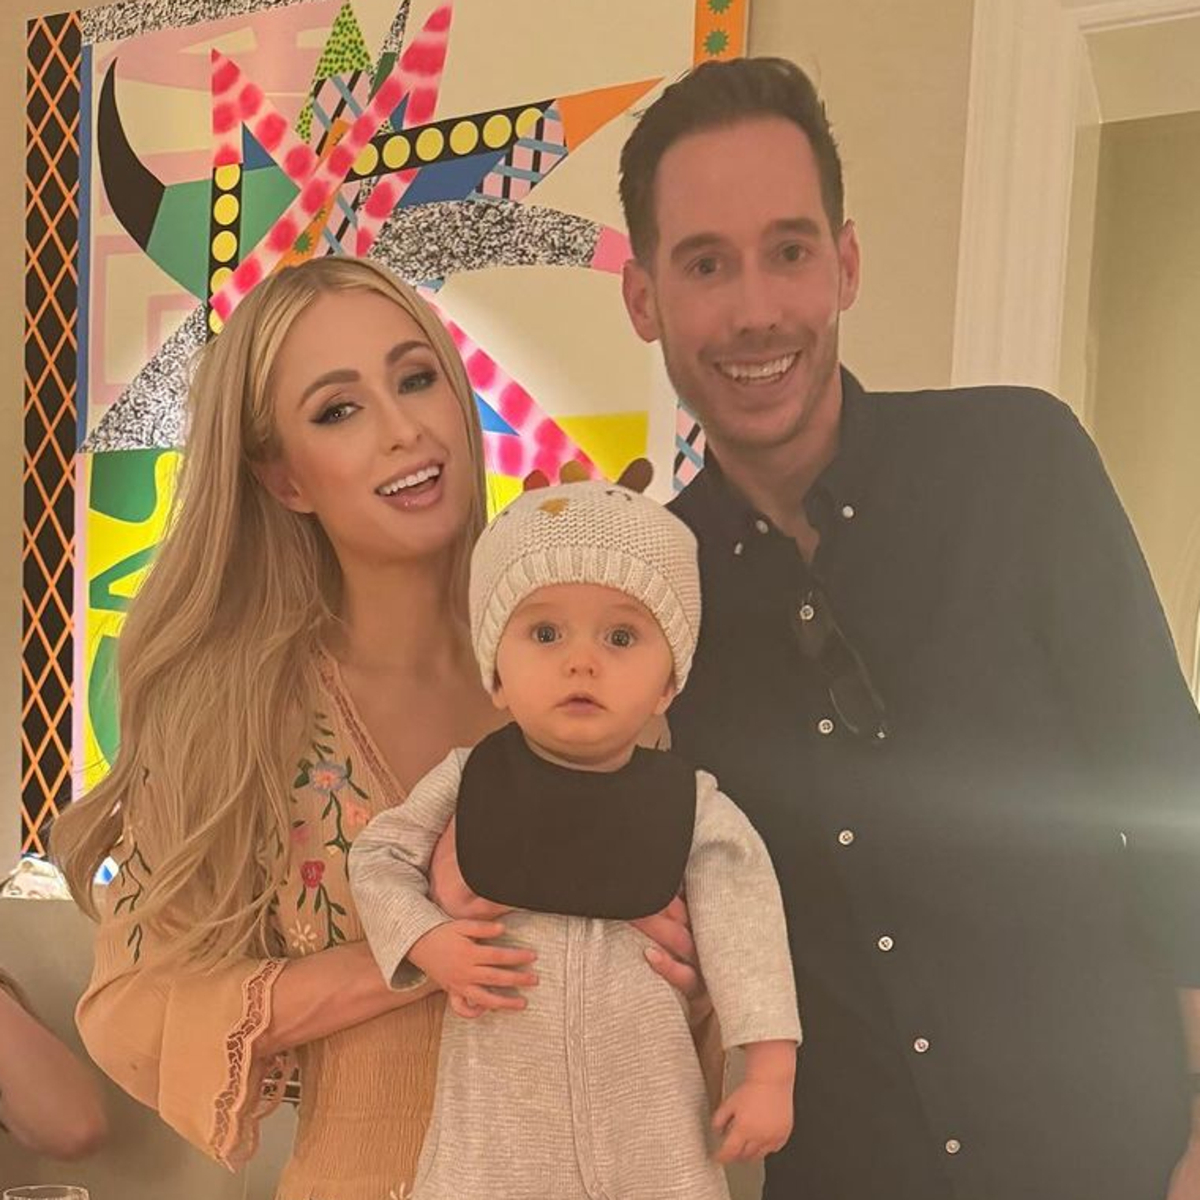 Why Paris Hilton's World as a Mom of 2 Kids Is Simply the Sweetest